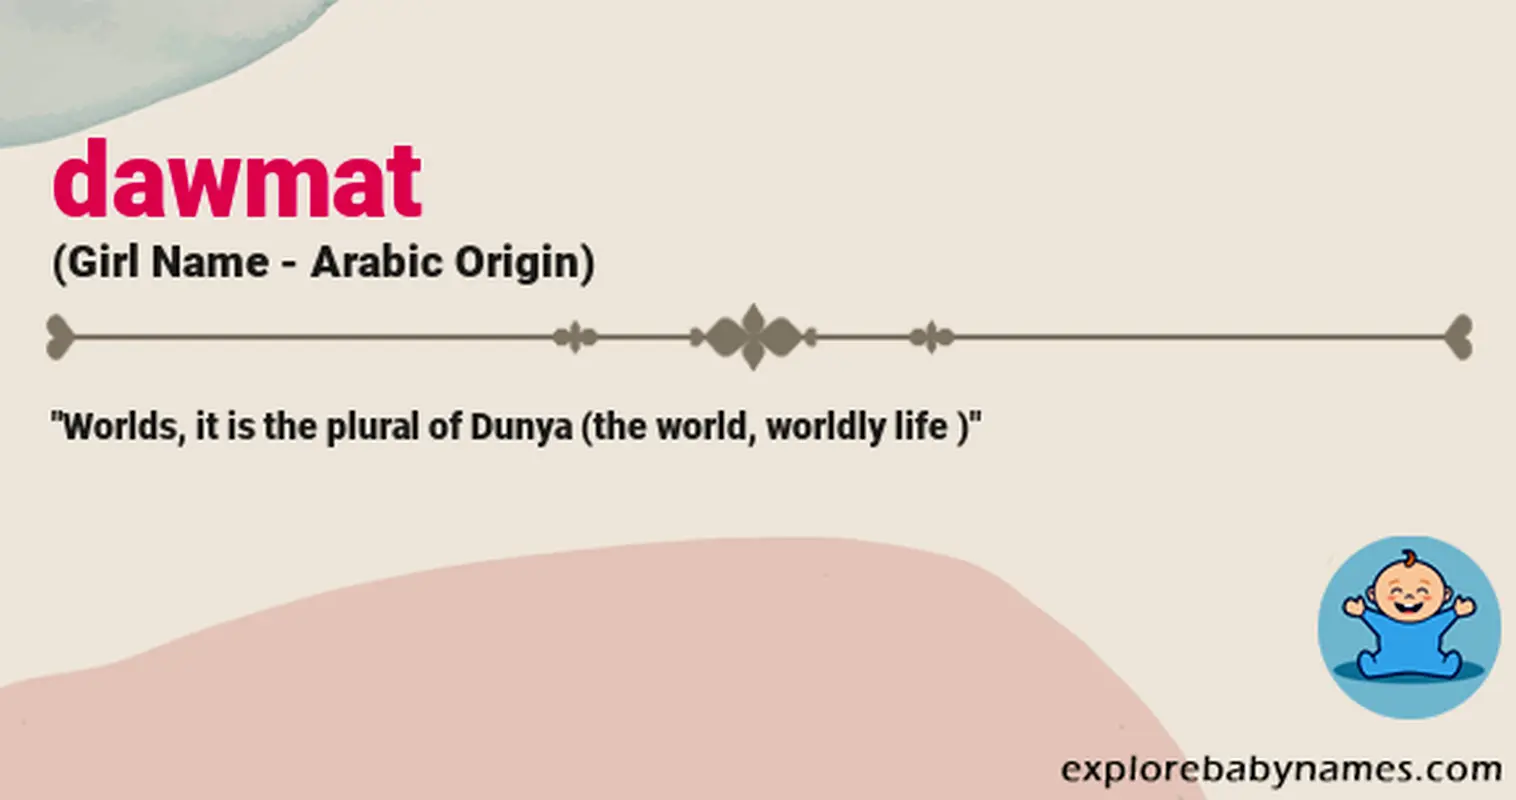 Meaning of Dawmat